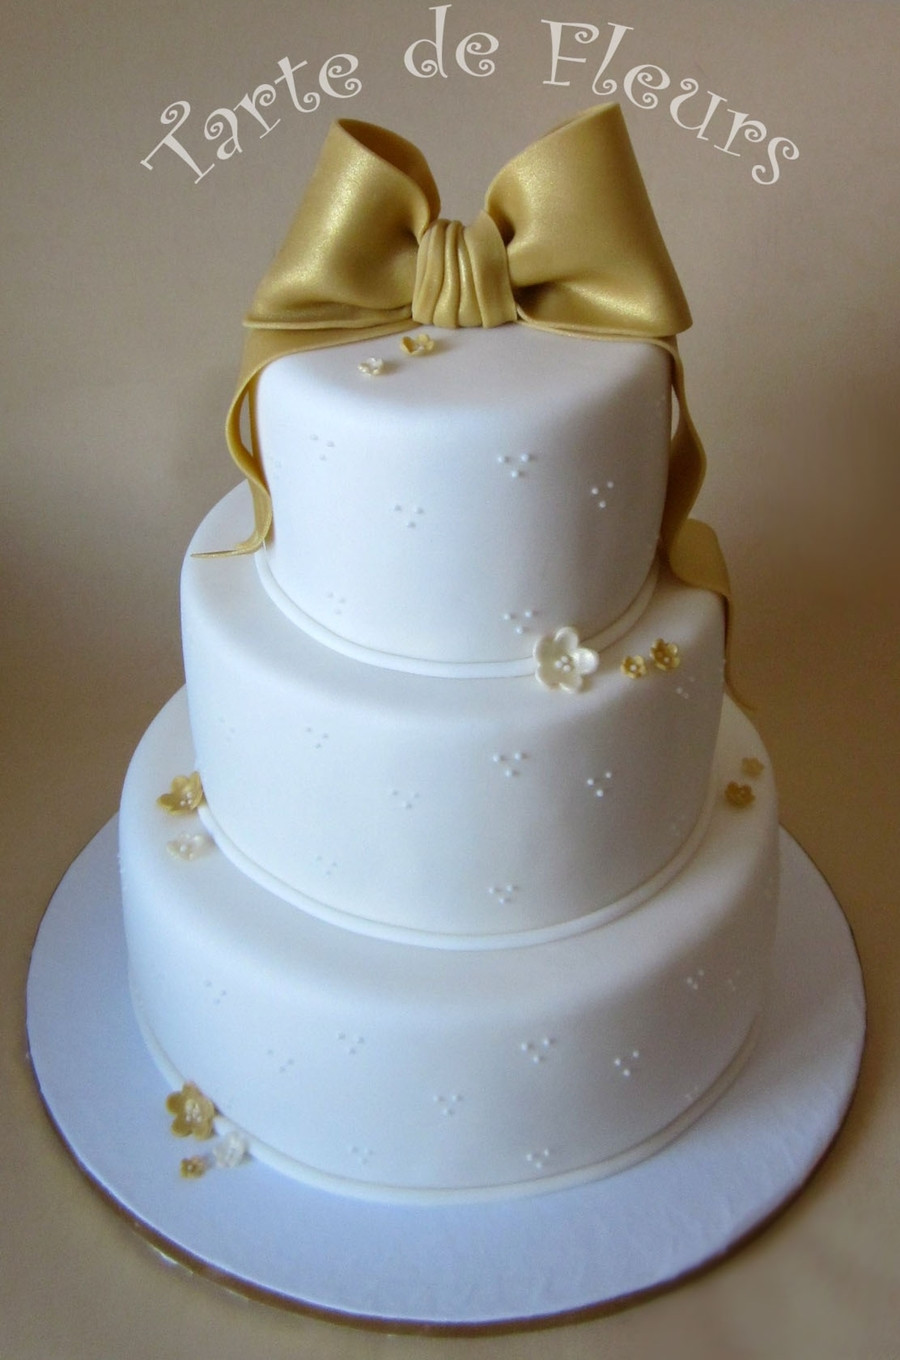 Wedding Cakes With Bow
 Gold Bow Wedding Cake CakeCentral